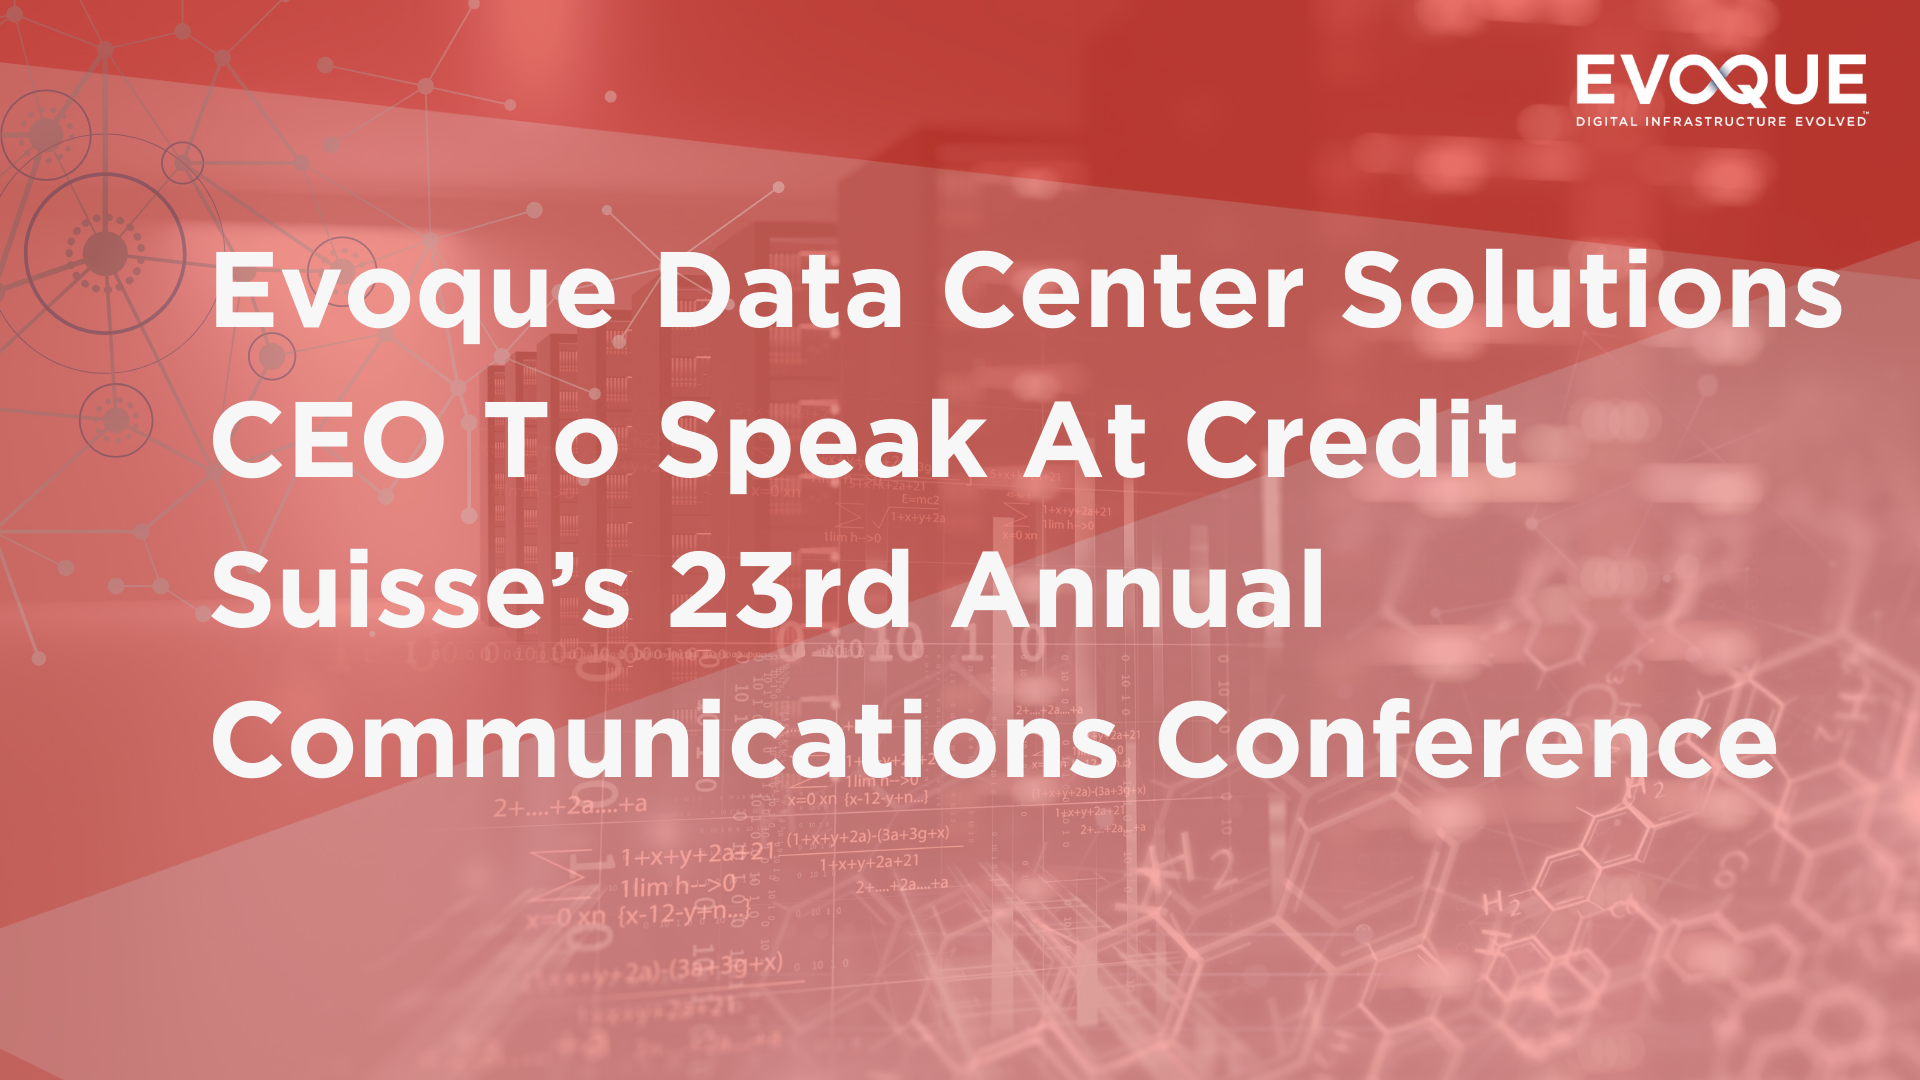 Evoque Data Center Solutions CEO To Speak At Credit Suisse’s 23rd Annual Communications Conference